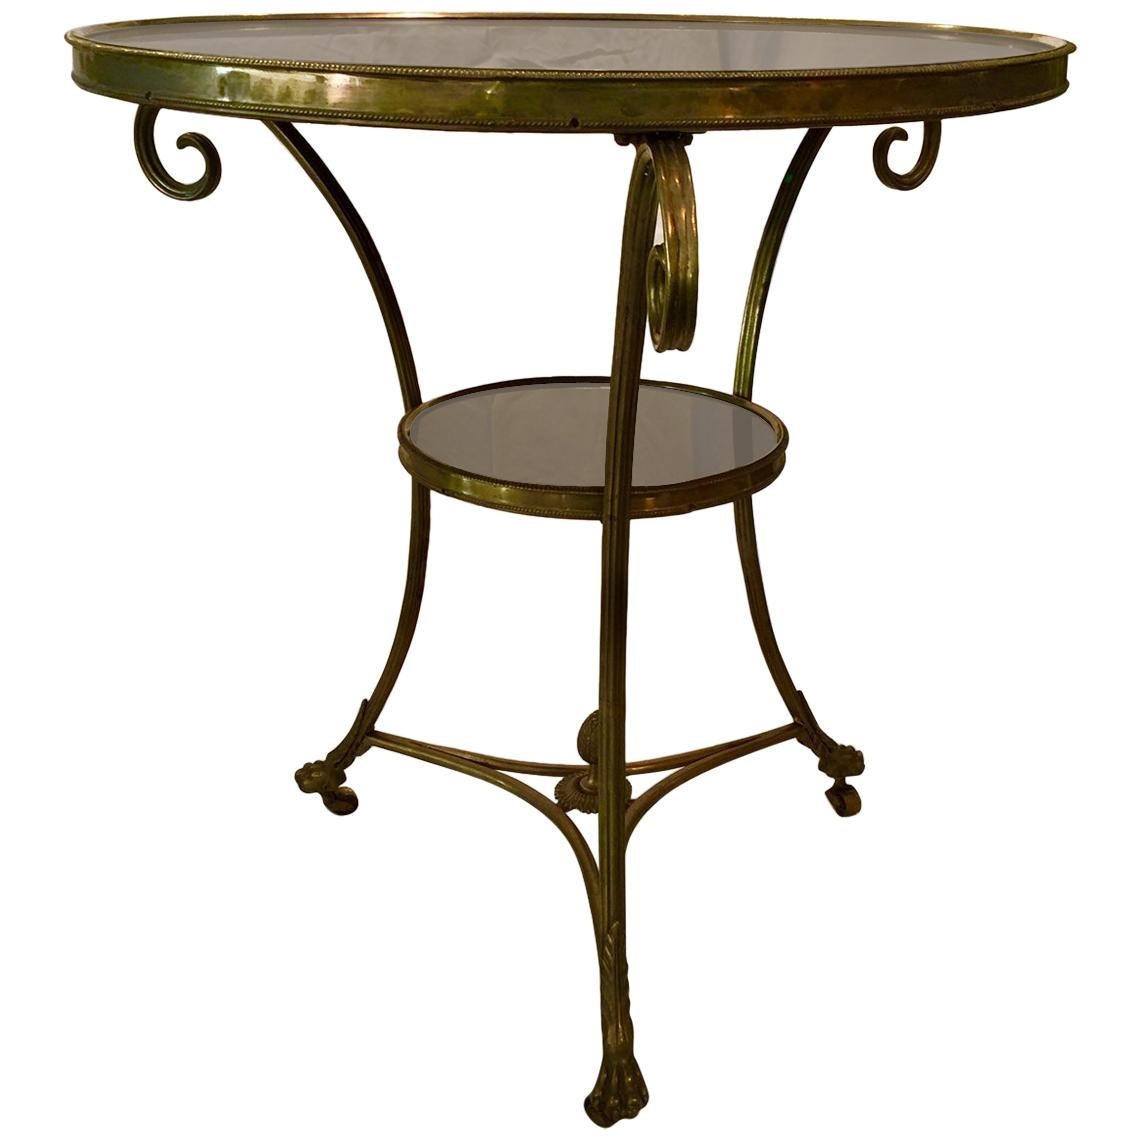 Neoclassical Bronze and Marble Empire style Gueridon Table, Two-Tier